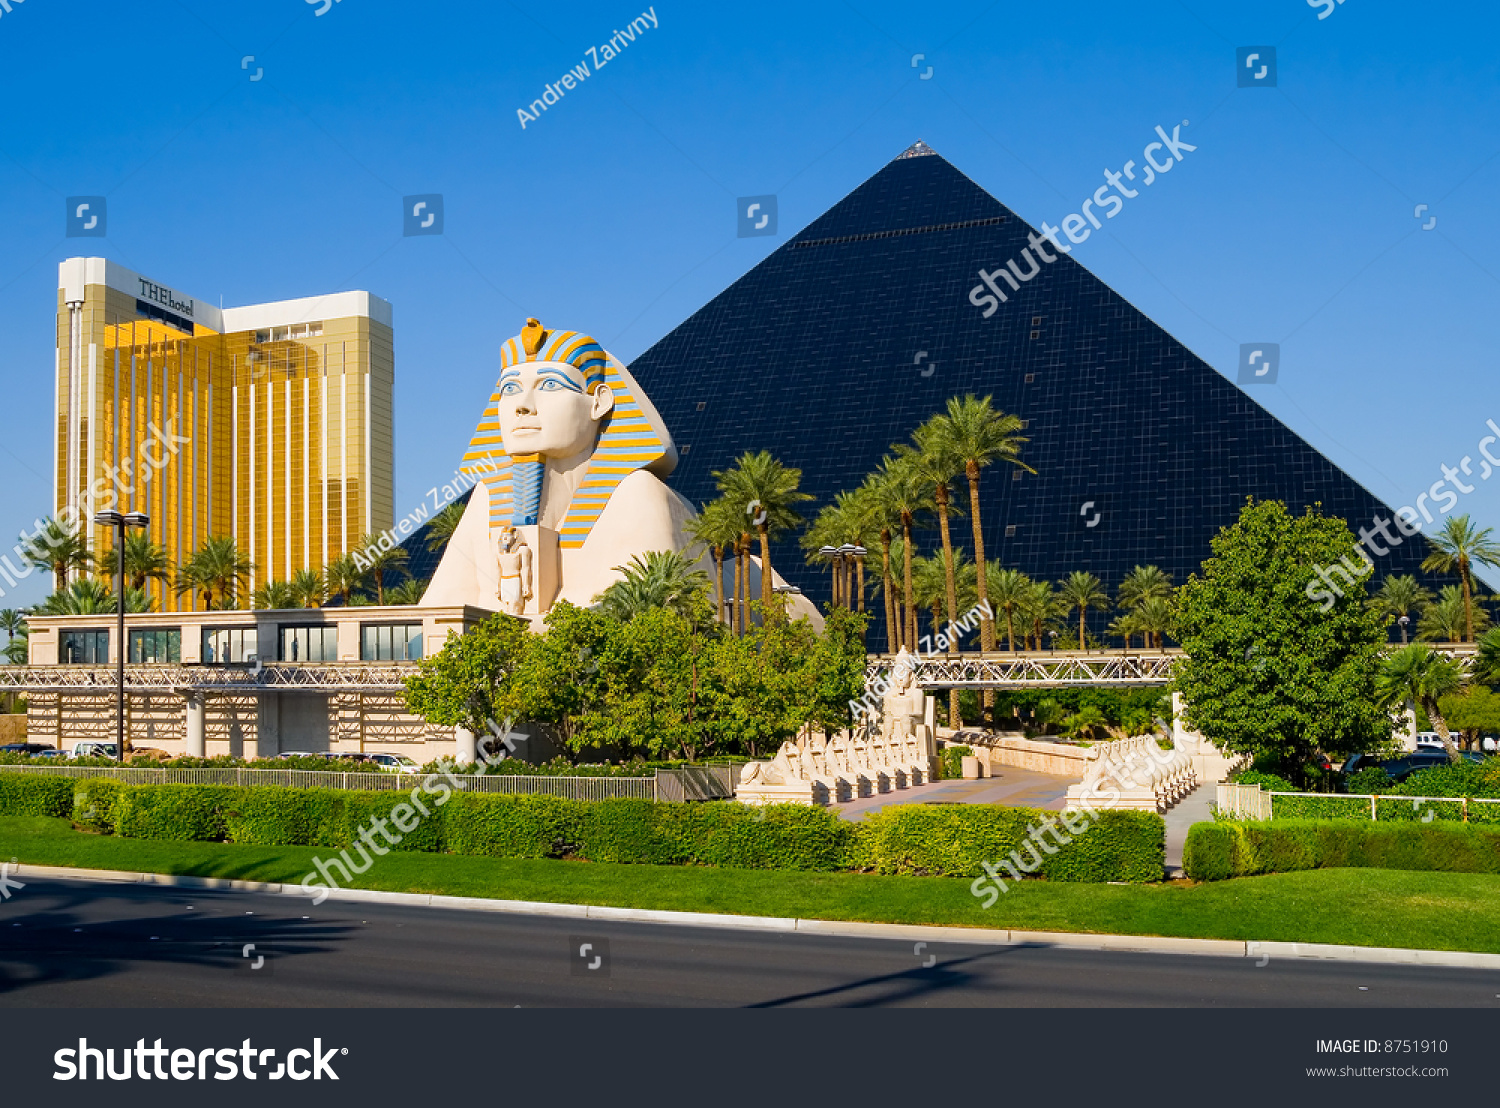 Image result for The Las Vegas Shooting And The Many Riddles of The Sphinx – by Michael Novakhov